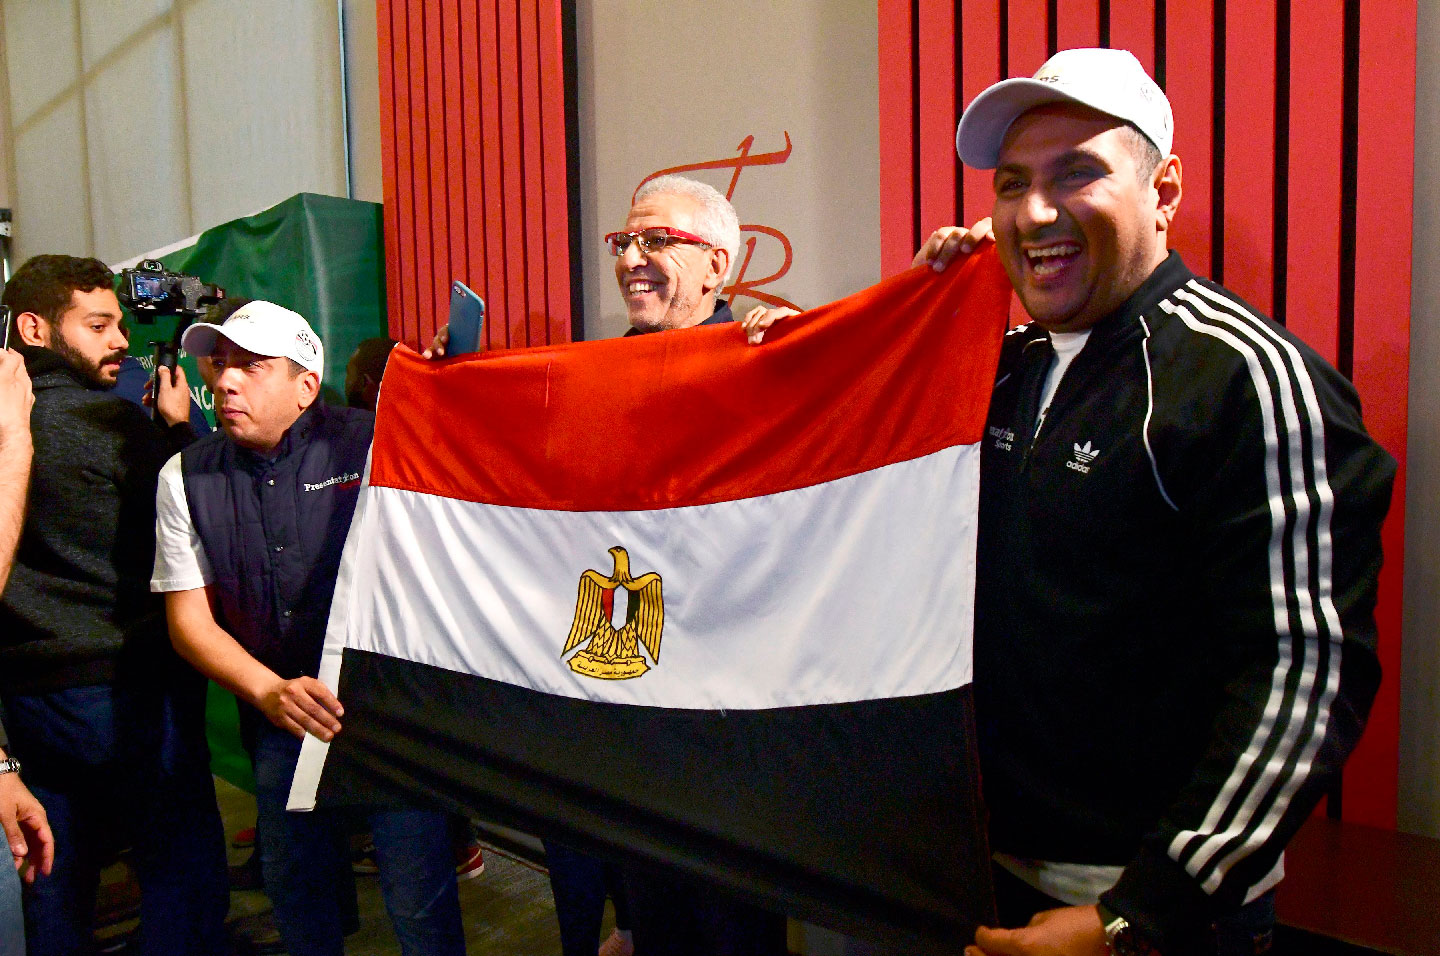 Egyptian representatives pose with their national flag as they celebrate the Confederation of African Football (CAF) executive committee's decision to choose Egypt to host the 2019 Africa Cup of Nations between June 15 and July 13, in an Hotel in Dakar on January 8, 2019.